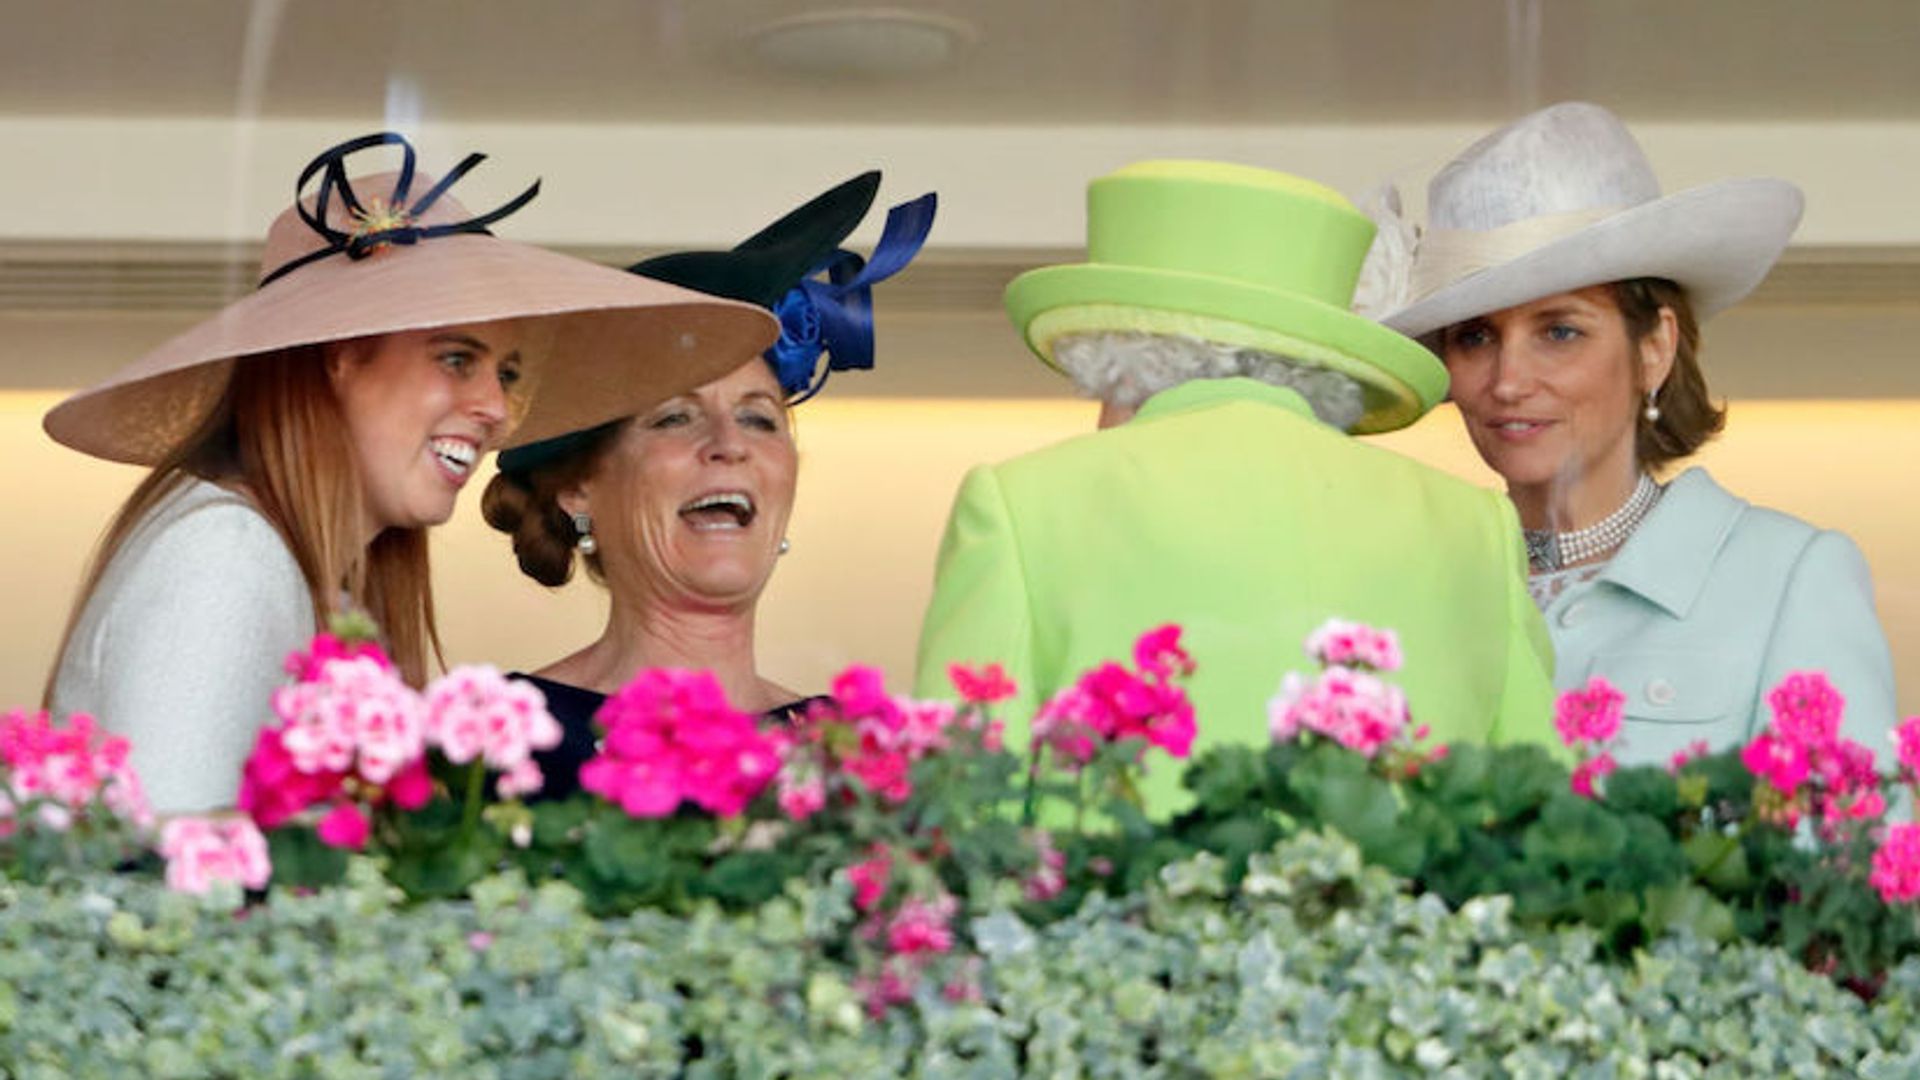 The Queen and Sarah Ferguson laugh and joke together at Royal Ascot: see the pictures